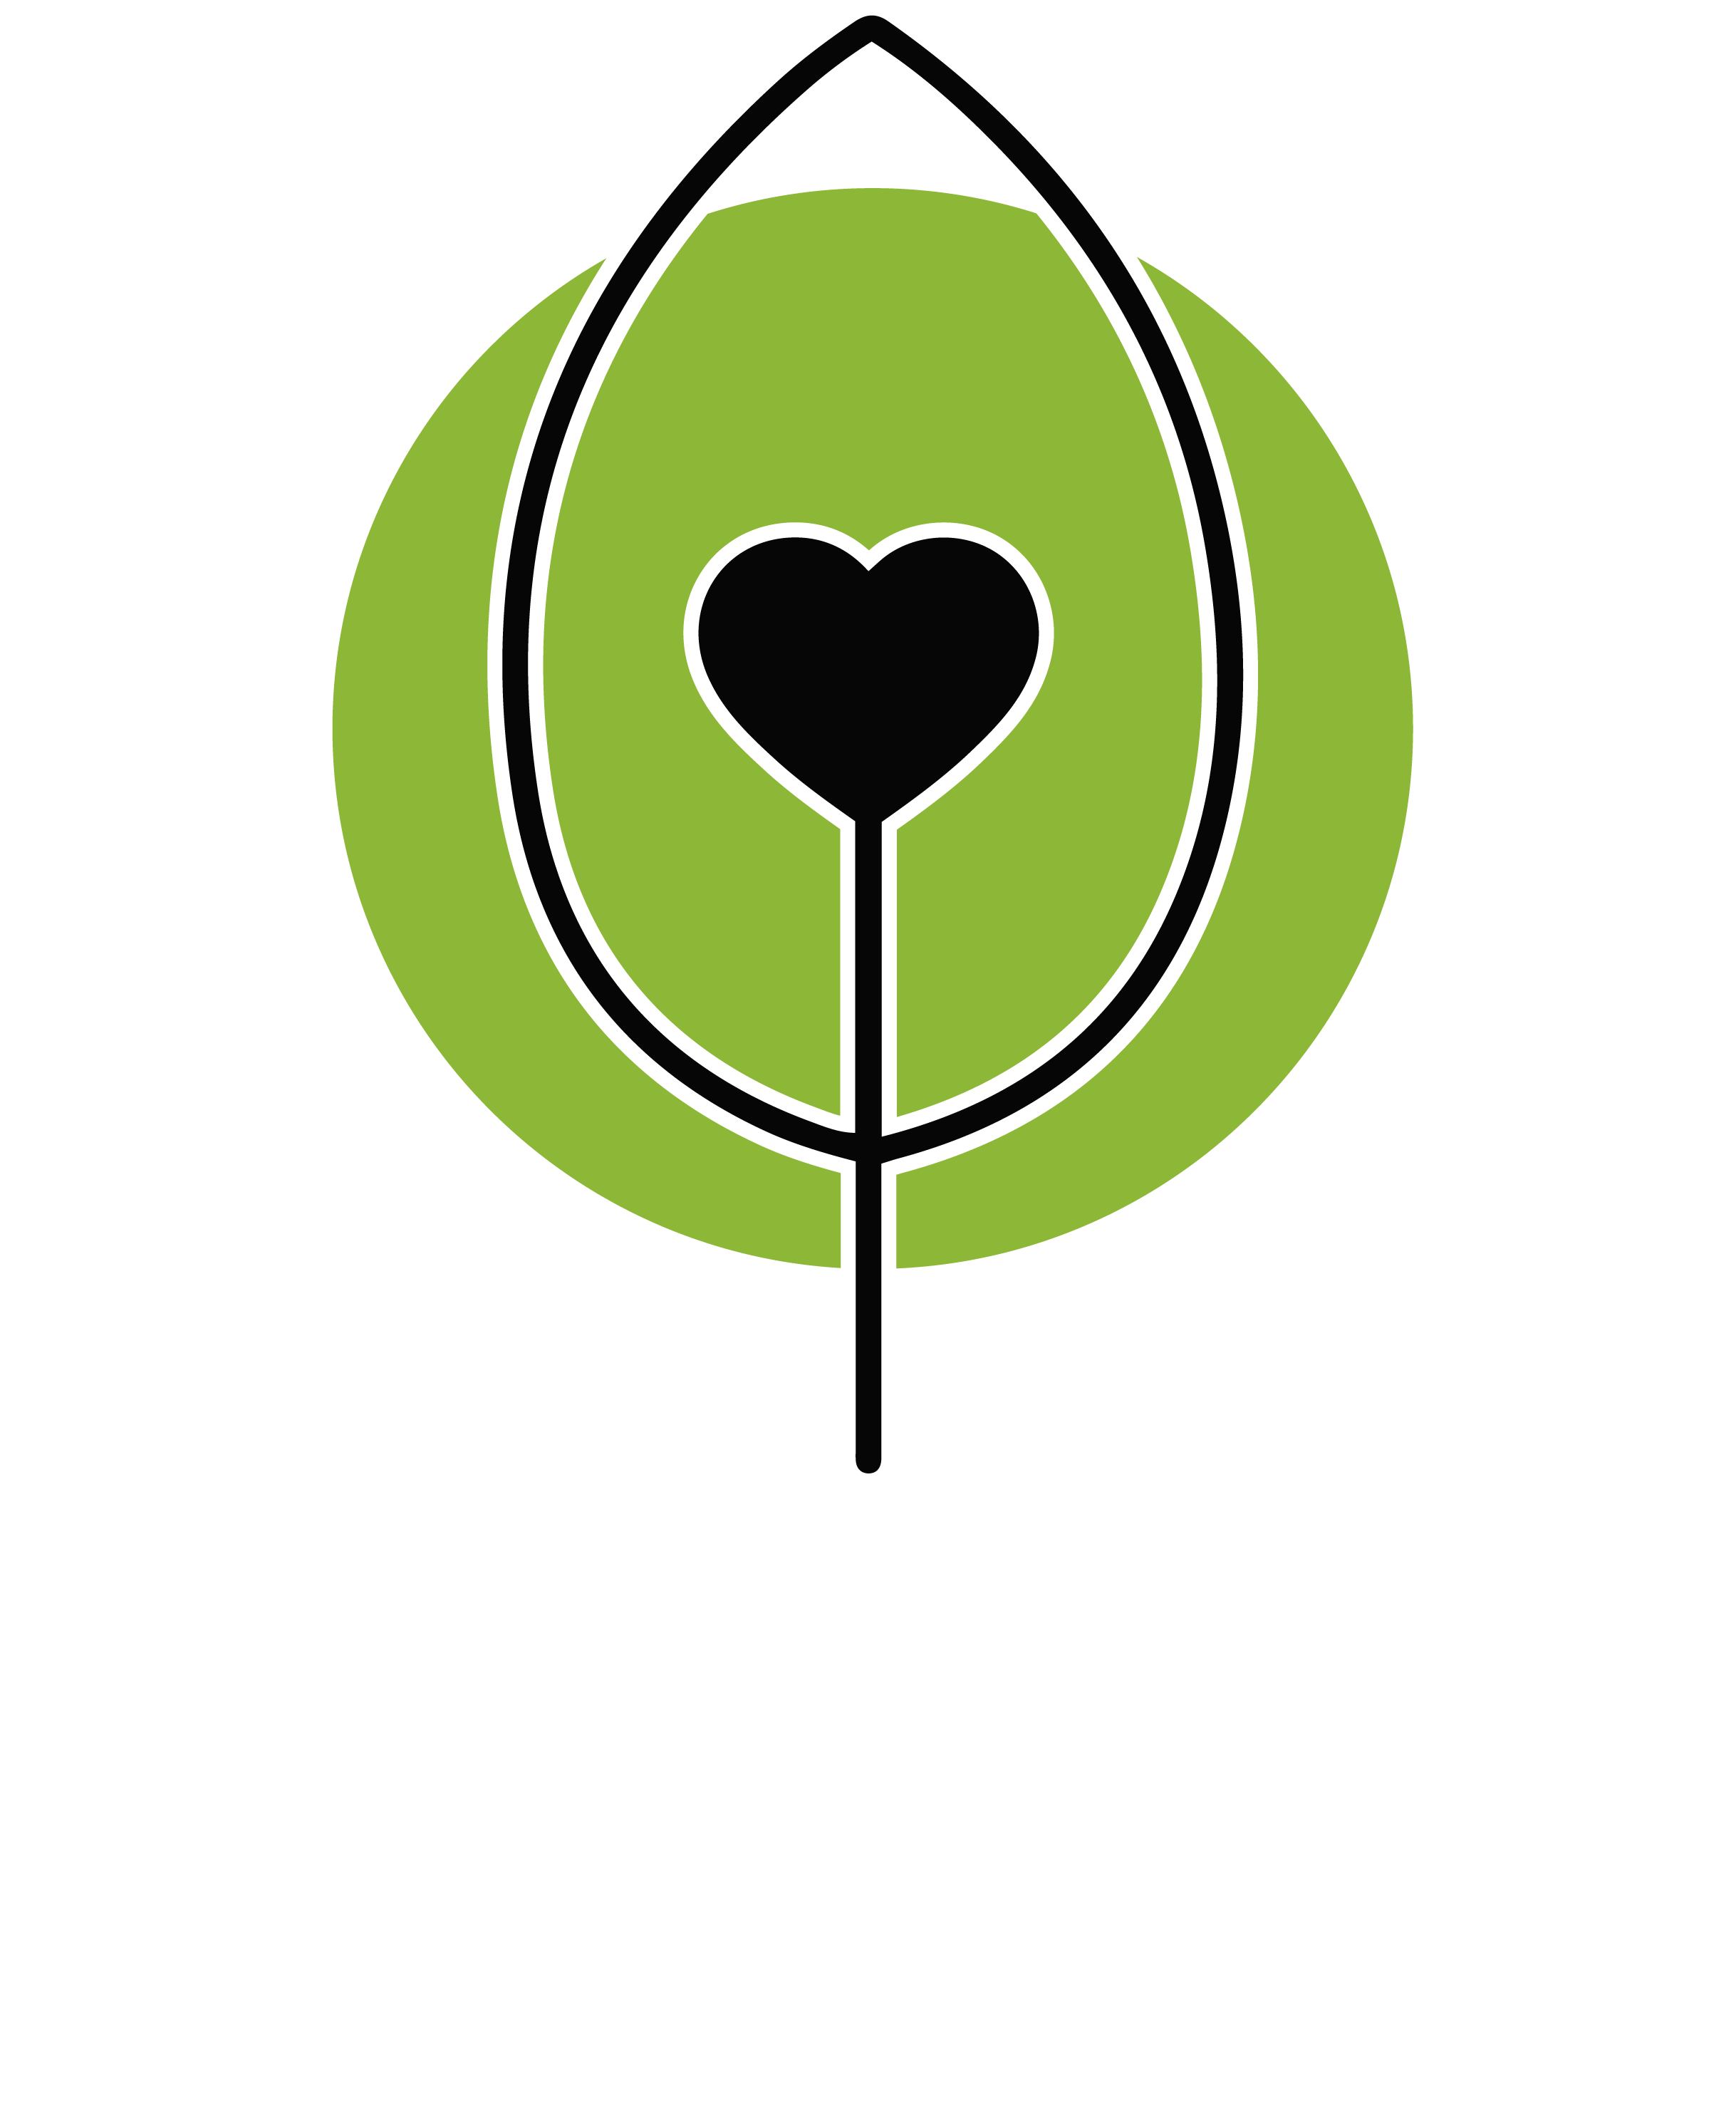 The Affordable Organic Store Logo